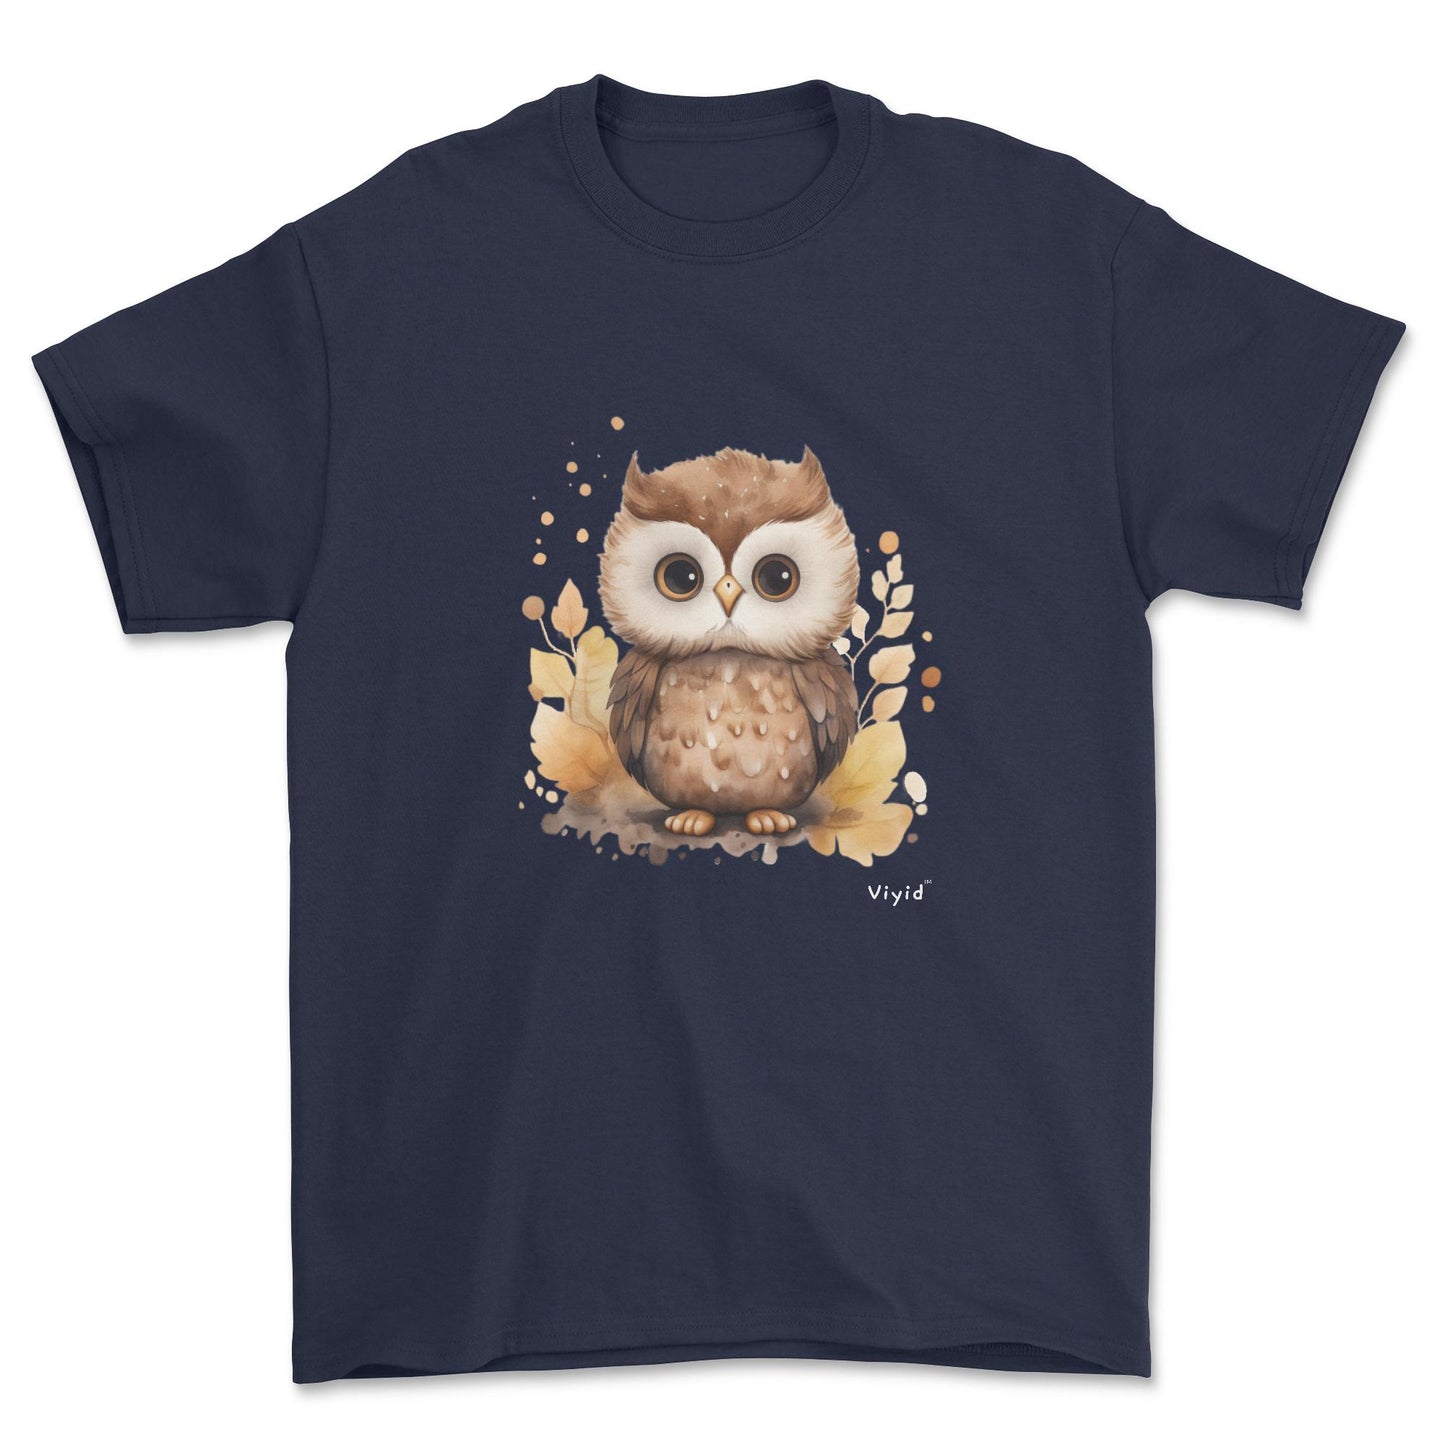 nocturnal owl youth t-shirt navy